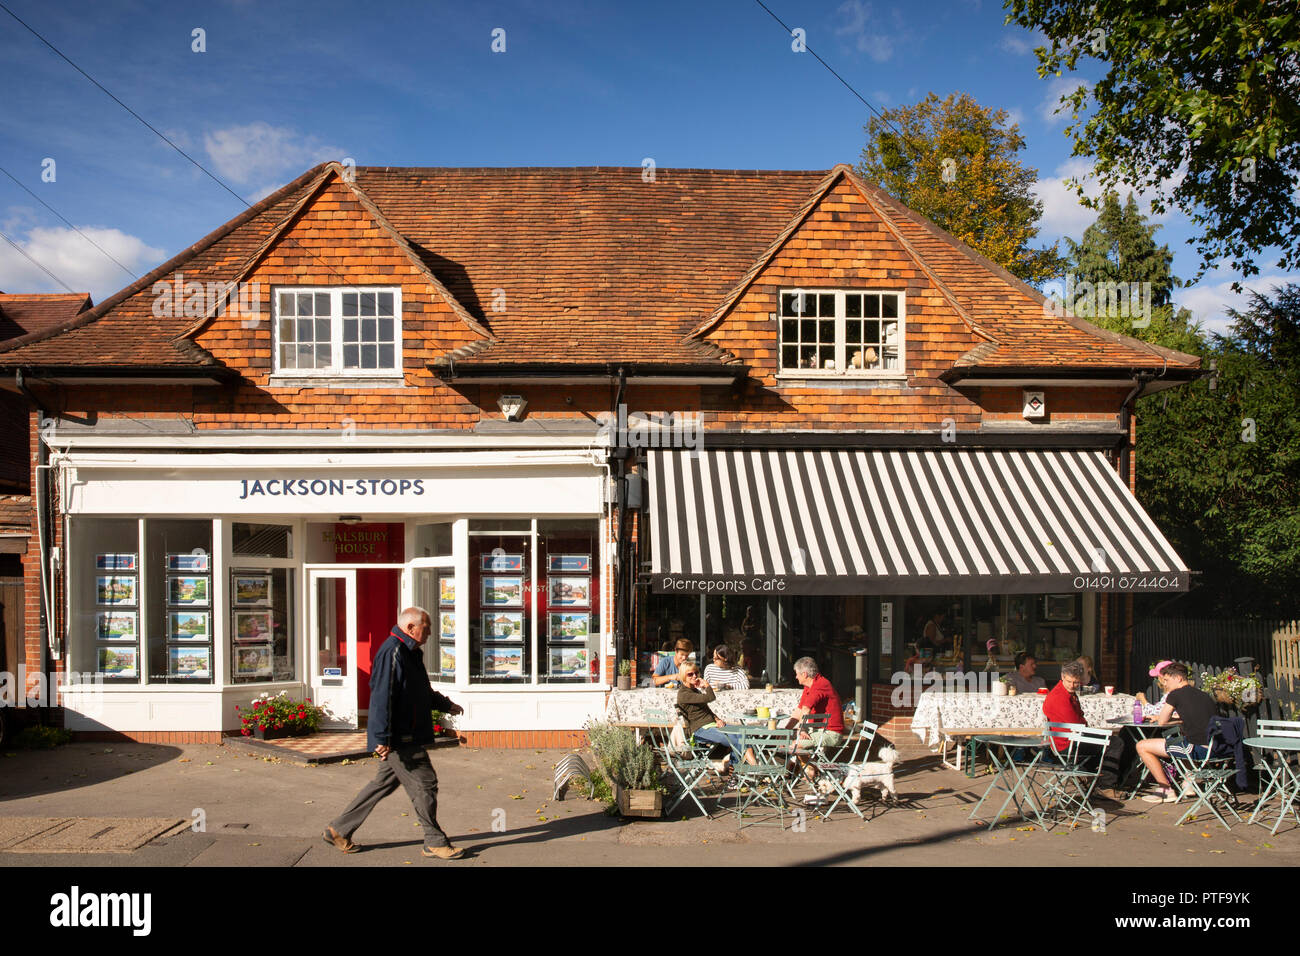 England, Berkshire, Goring on Thames, customers sat in sunshine outside, Pierrepont’s Cafe Stock Photo